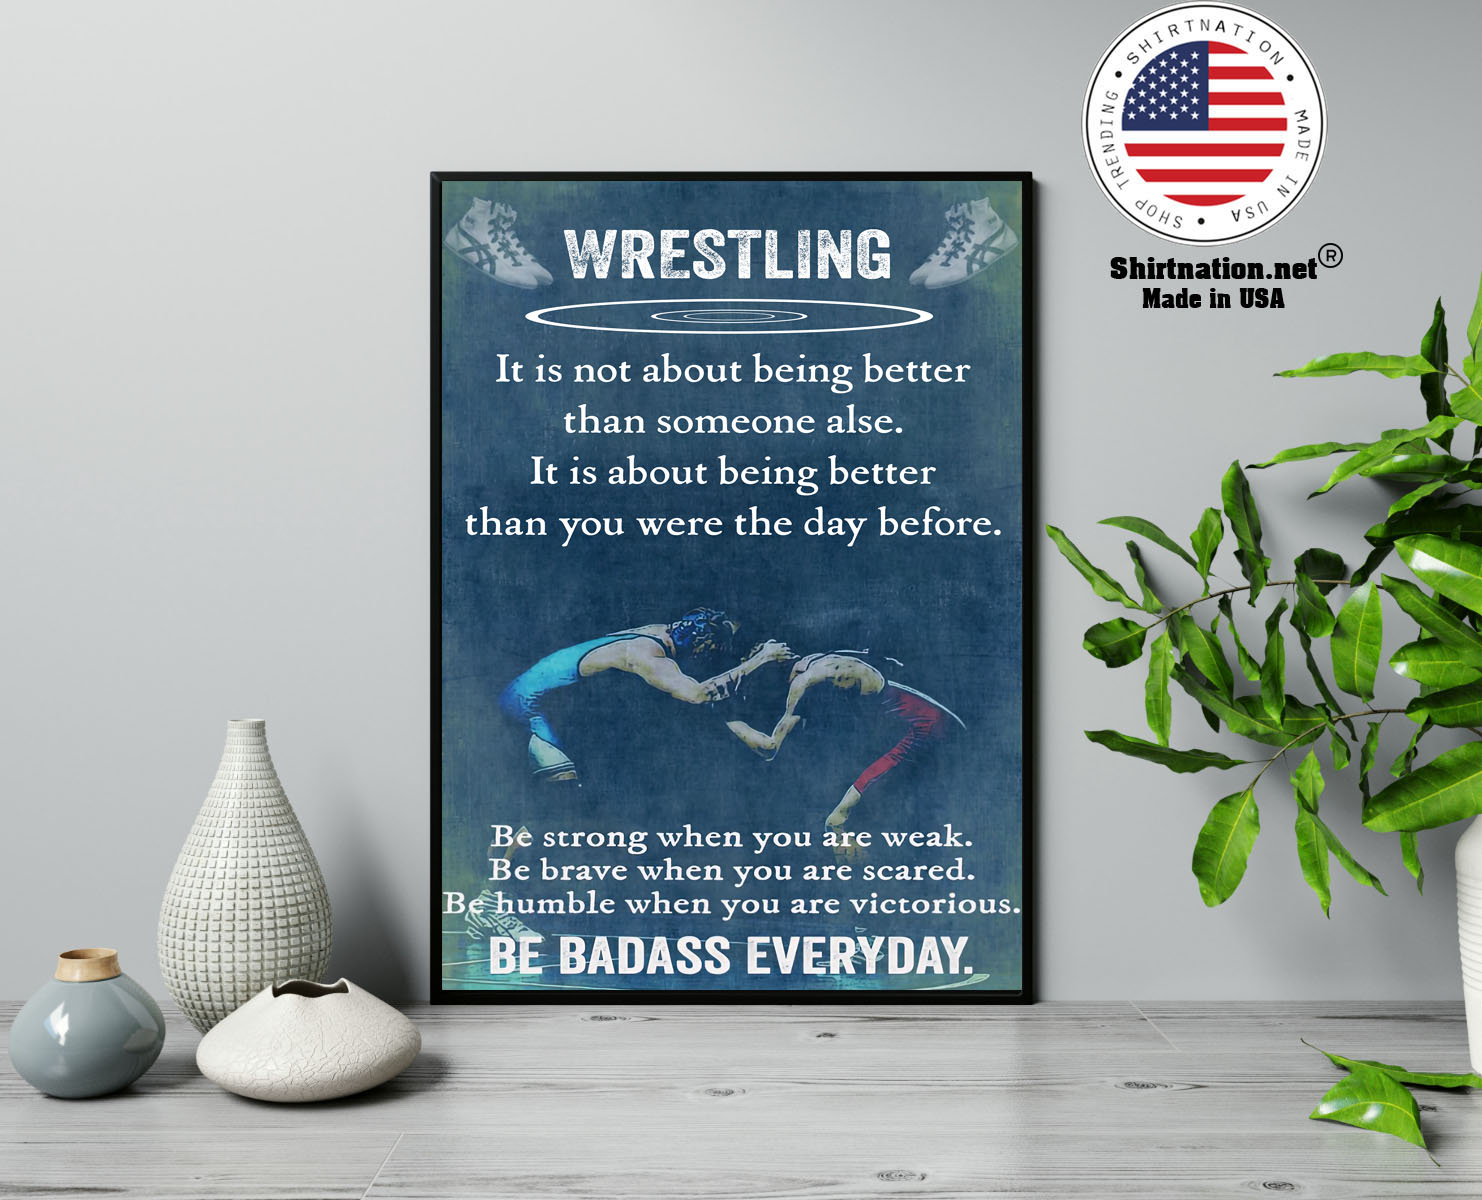 Wrestling it is not about being better than someine else poster 13